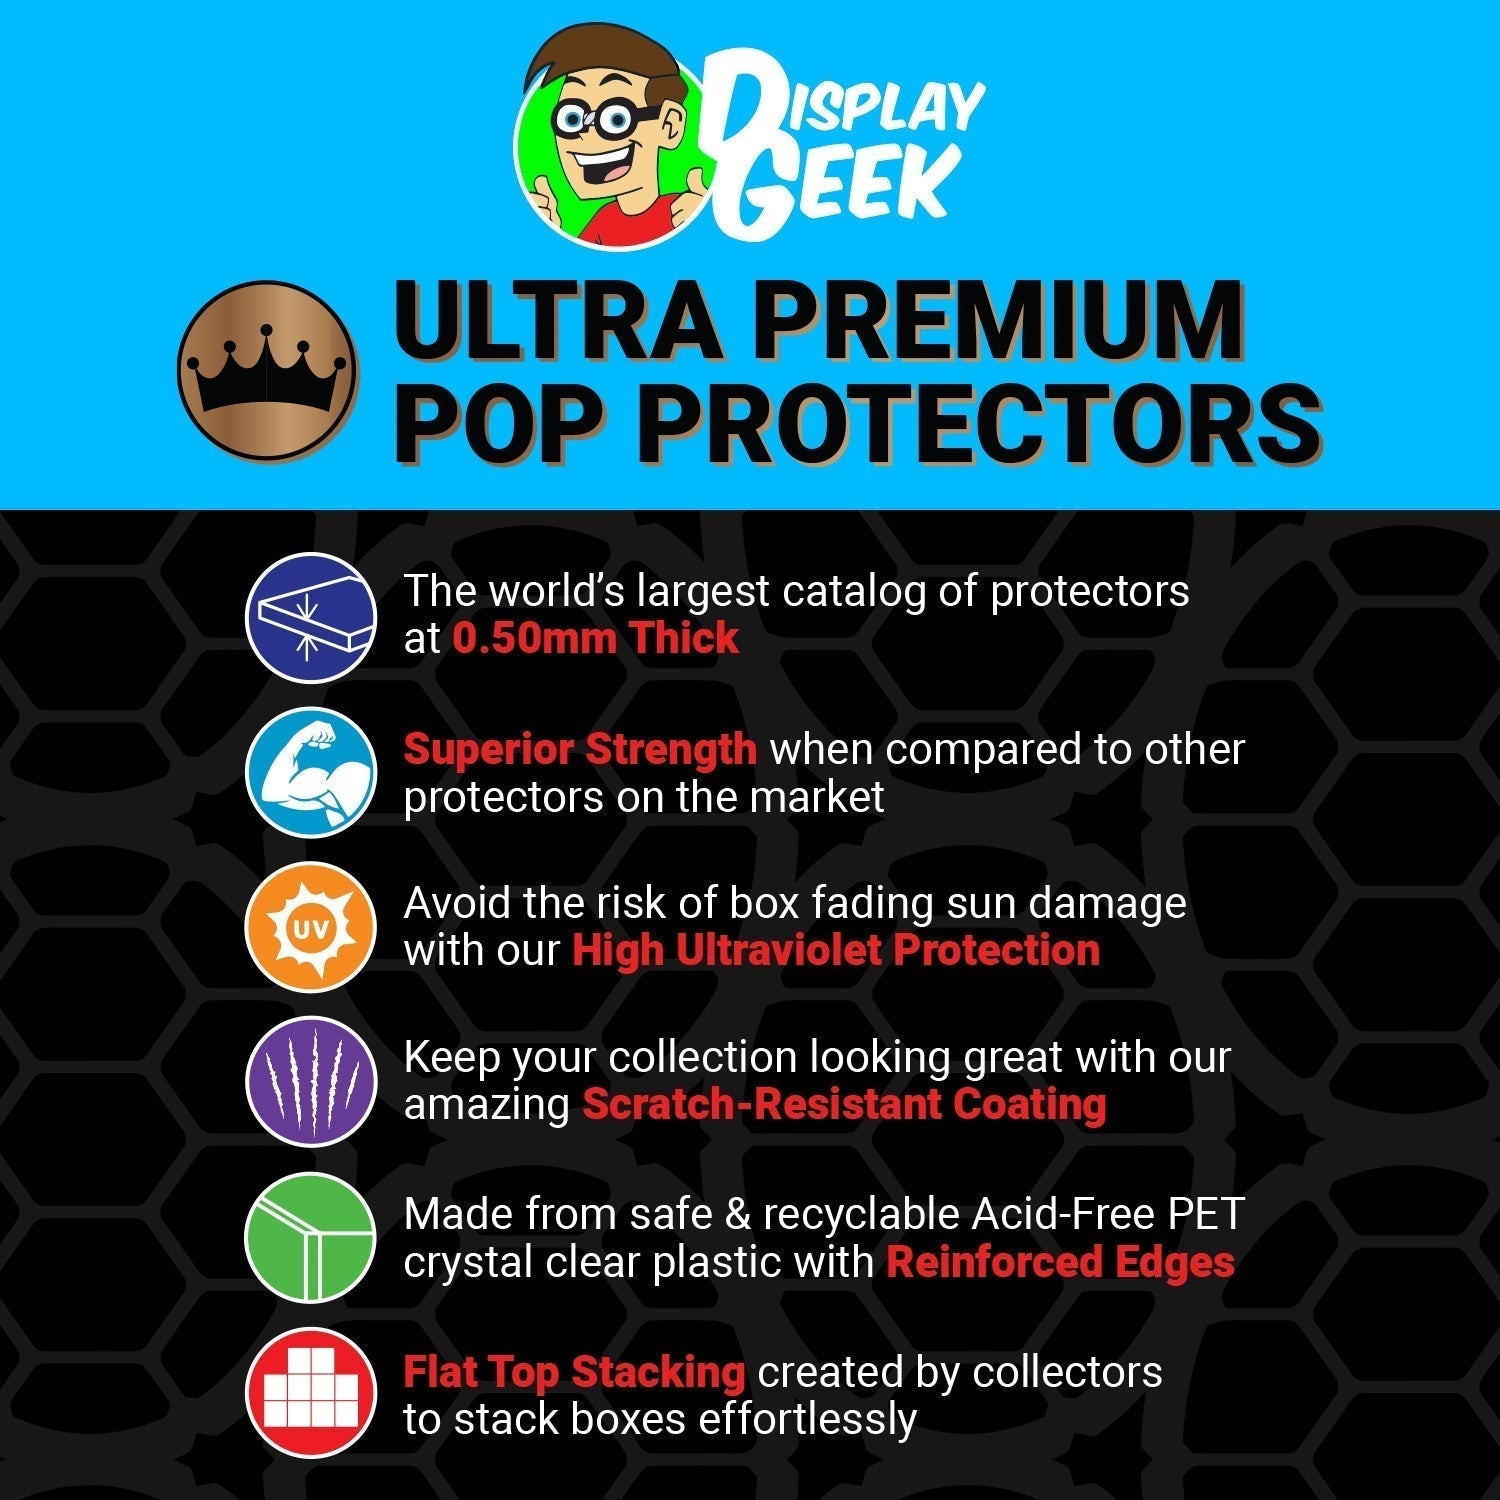 Pop Protector for 2 Pack Foxy The Pirate with Freddy Funko Pop - PPG Pop Protector Guide Search Created by Display Geek